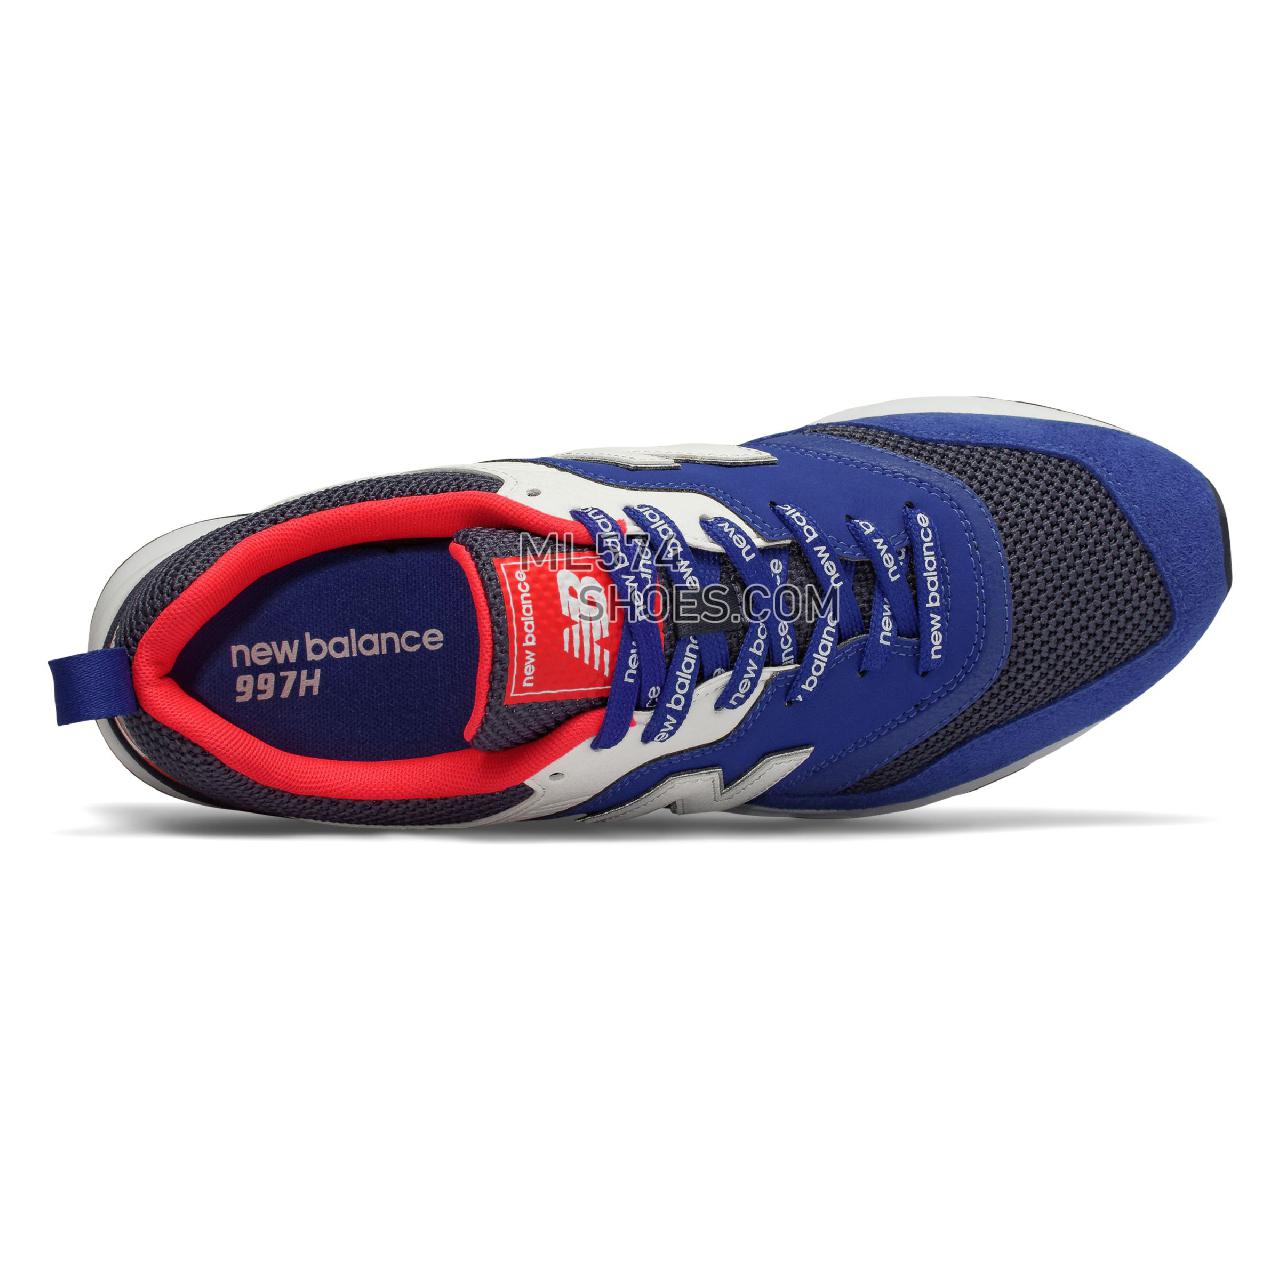 New Balance 997H - Men's Classic Sneakers - Team Royal with Energy Red - CM997HEB